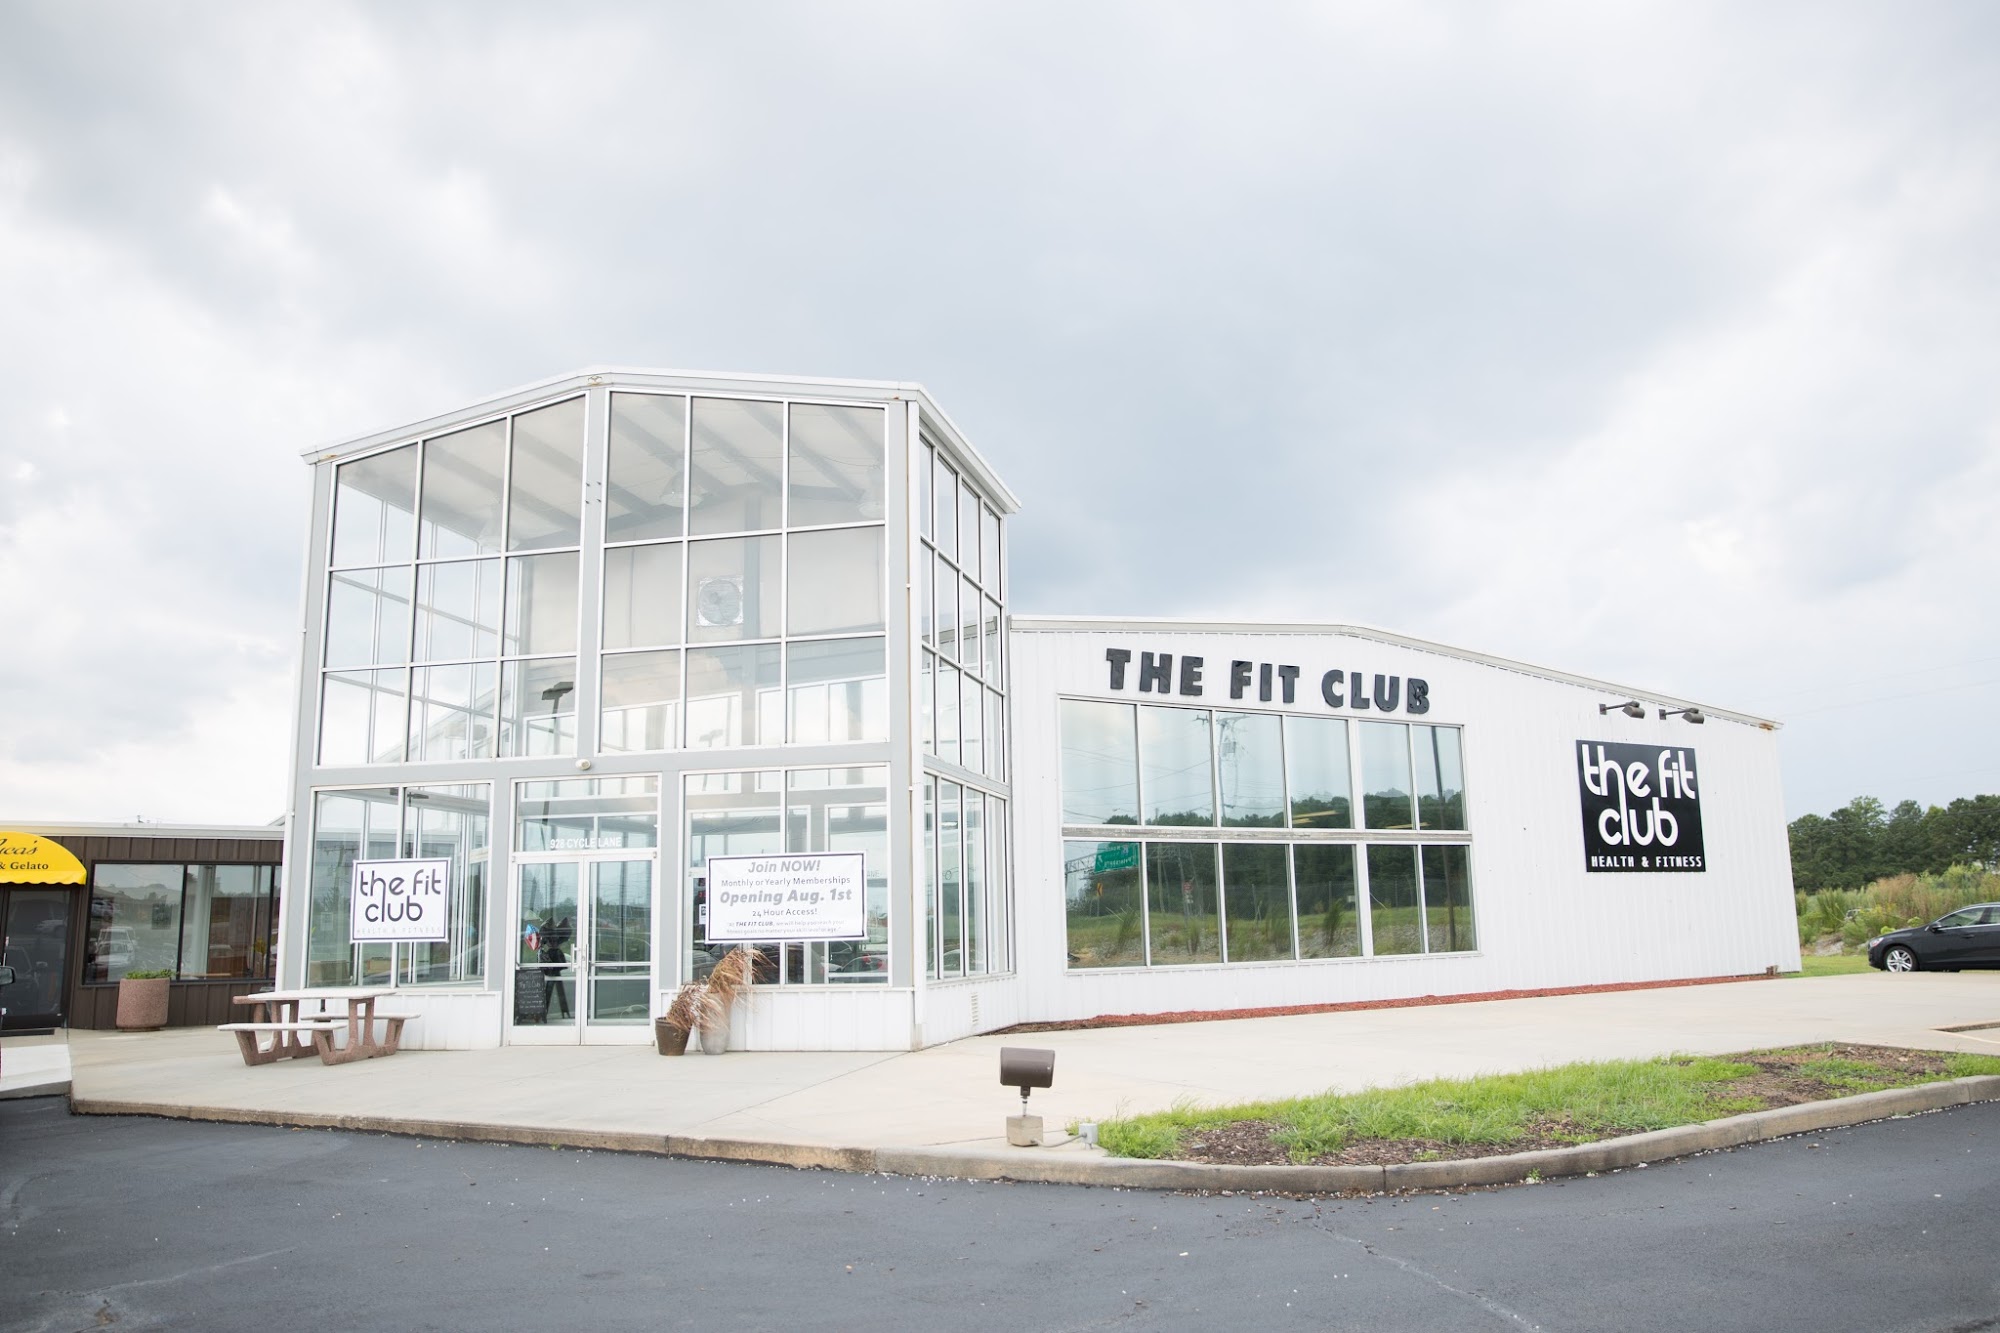 The Fit Club